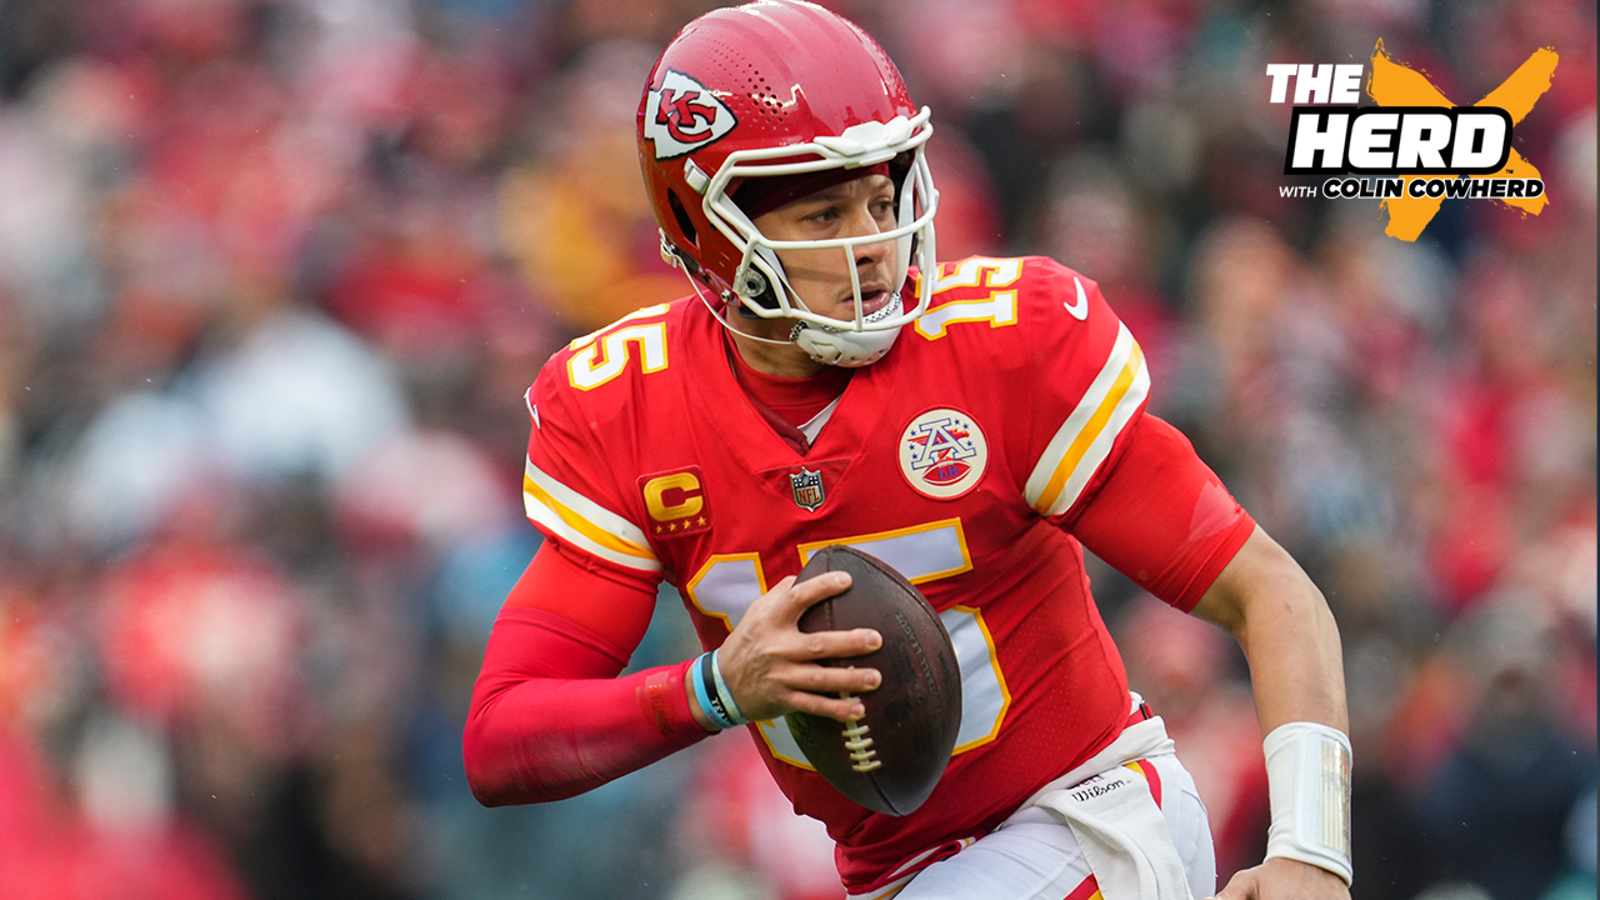 Chiefs vs. Eagles prediction and betting odds for Super Bowl LVII 